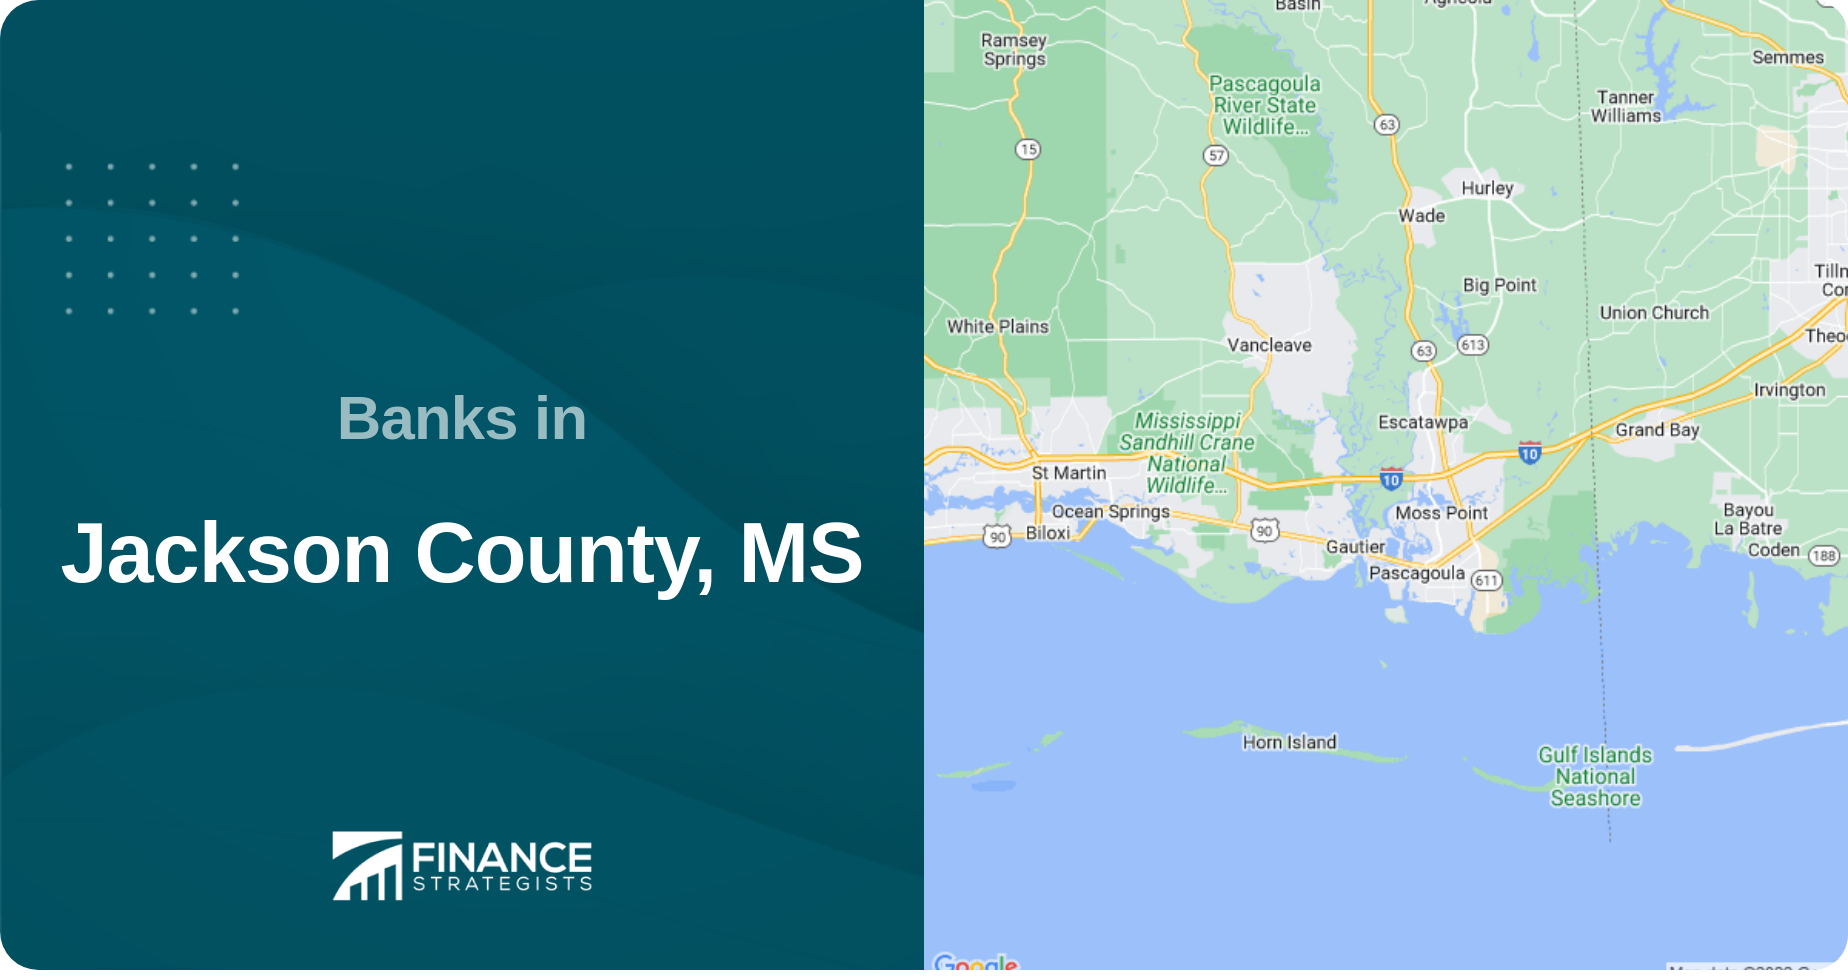 Banks in Jackson County, MS